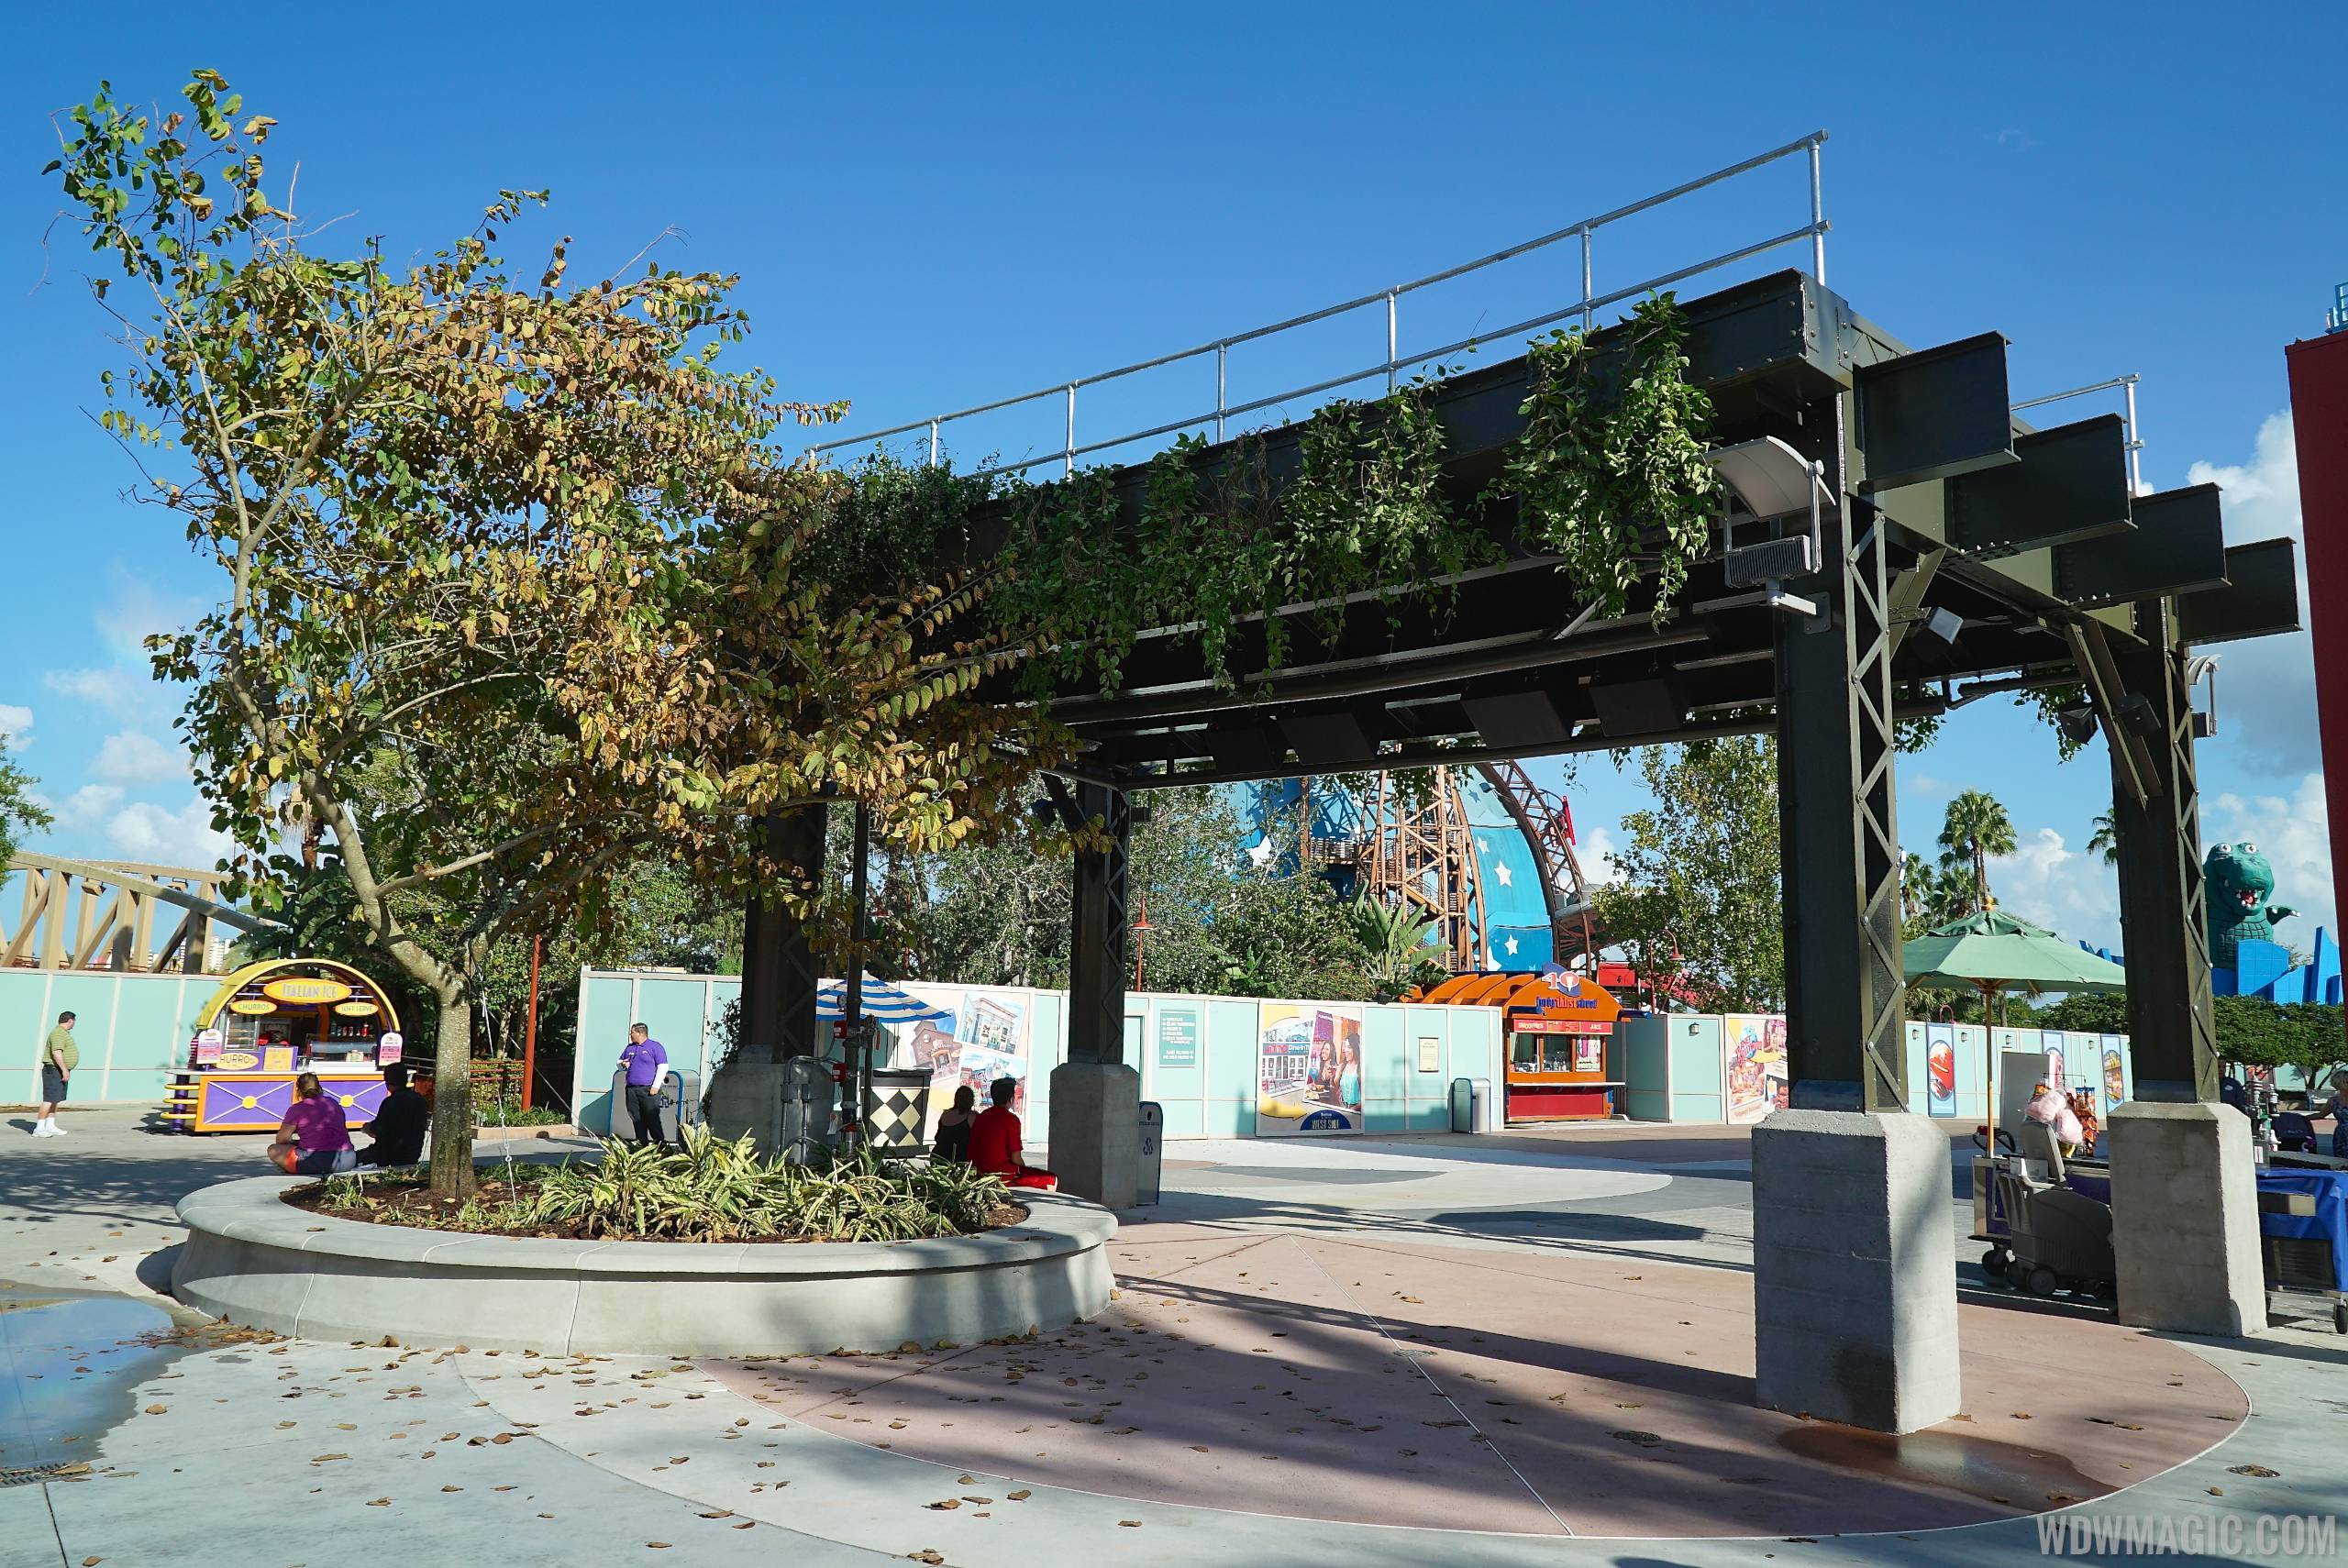 PHOTOS - Disney Springs West Side High Line structure gets landscaping